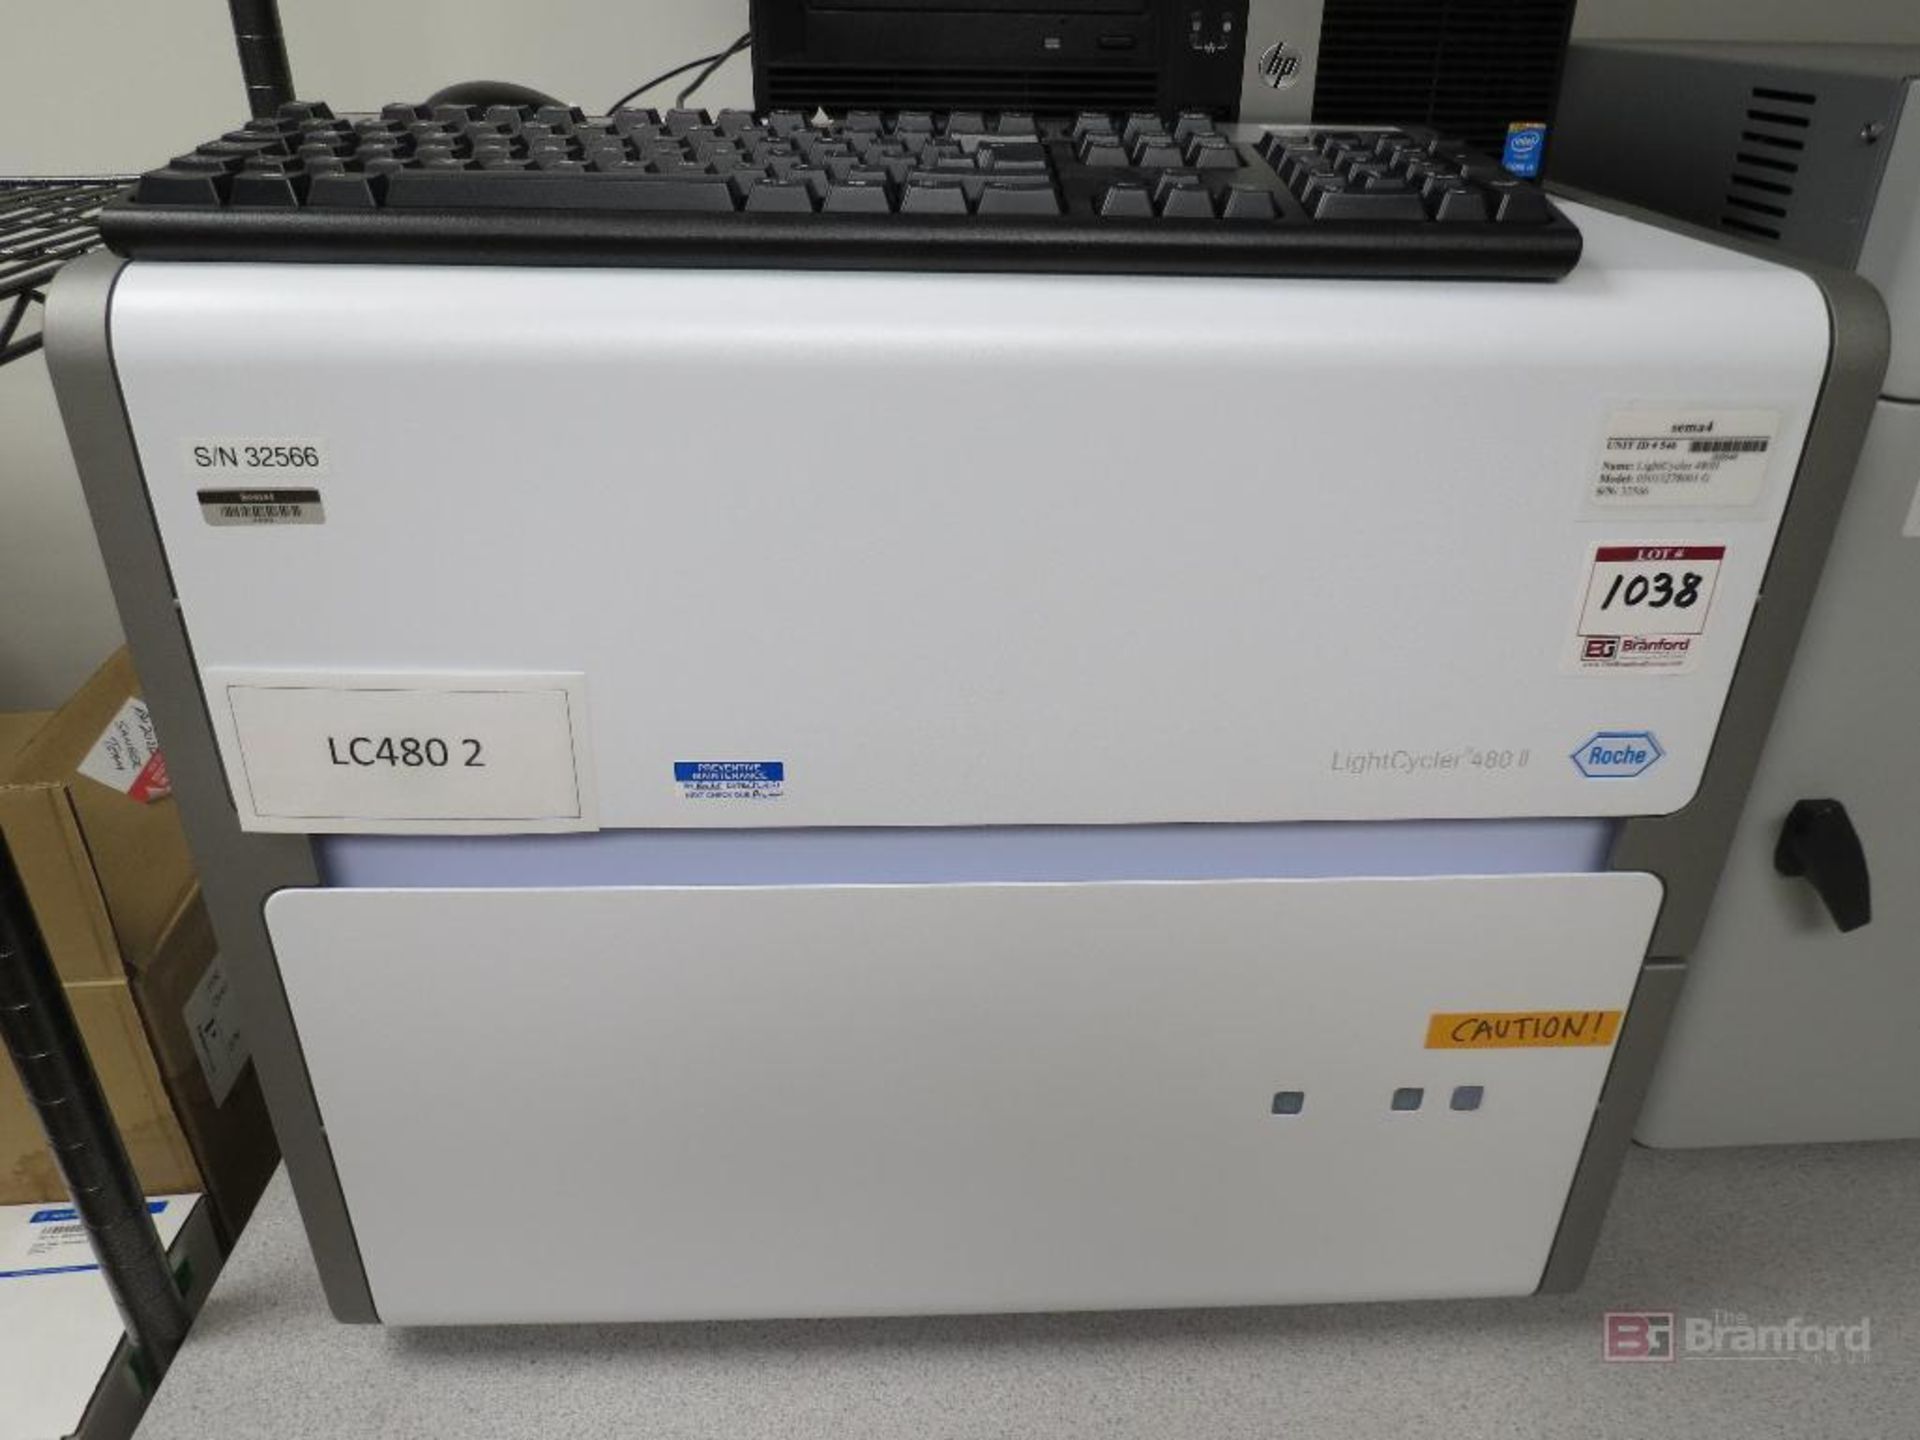 Roche LightCycler 480 II PCR System, w/ HP 5810 PC - Image 2 of 3